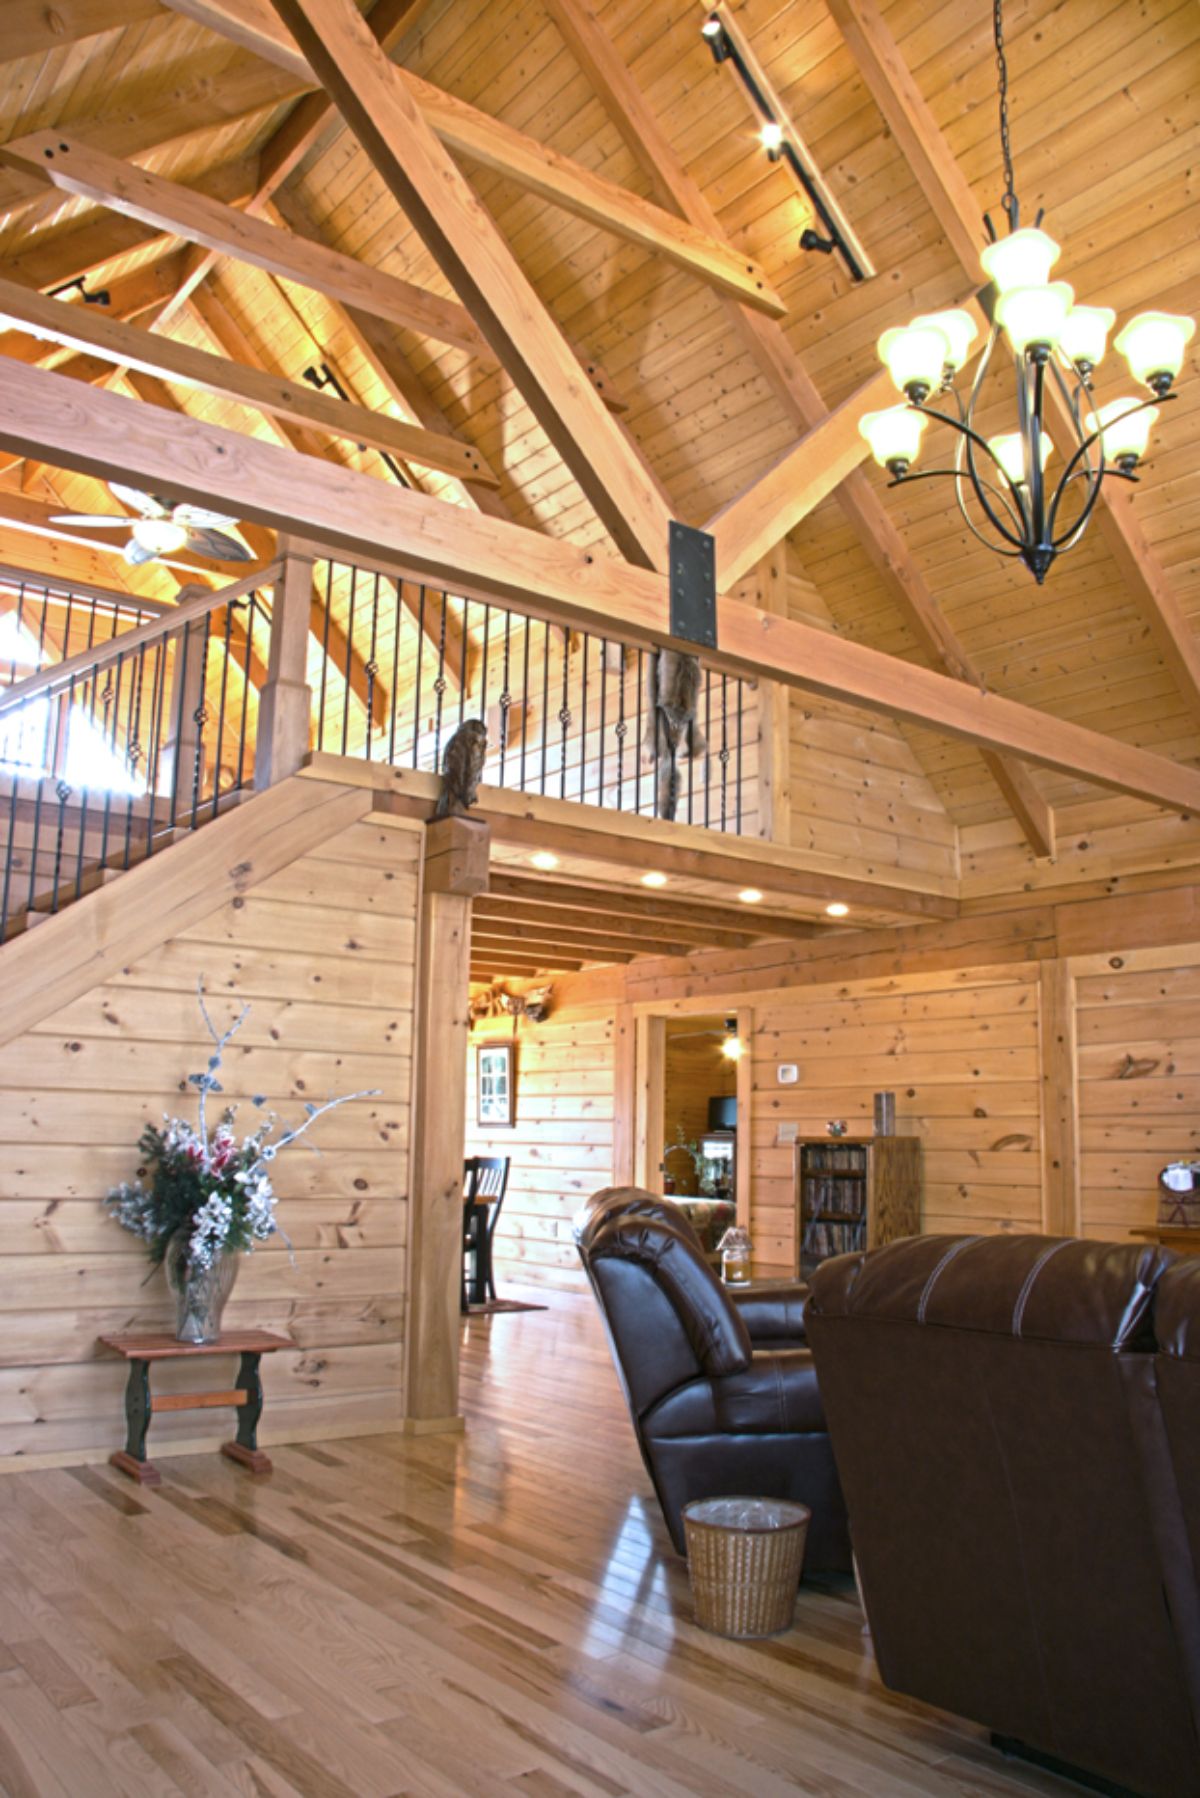 loft above living room in log cabin with black leather sofa in foreground